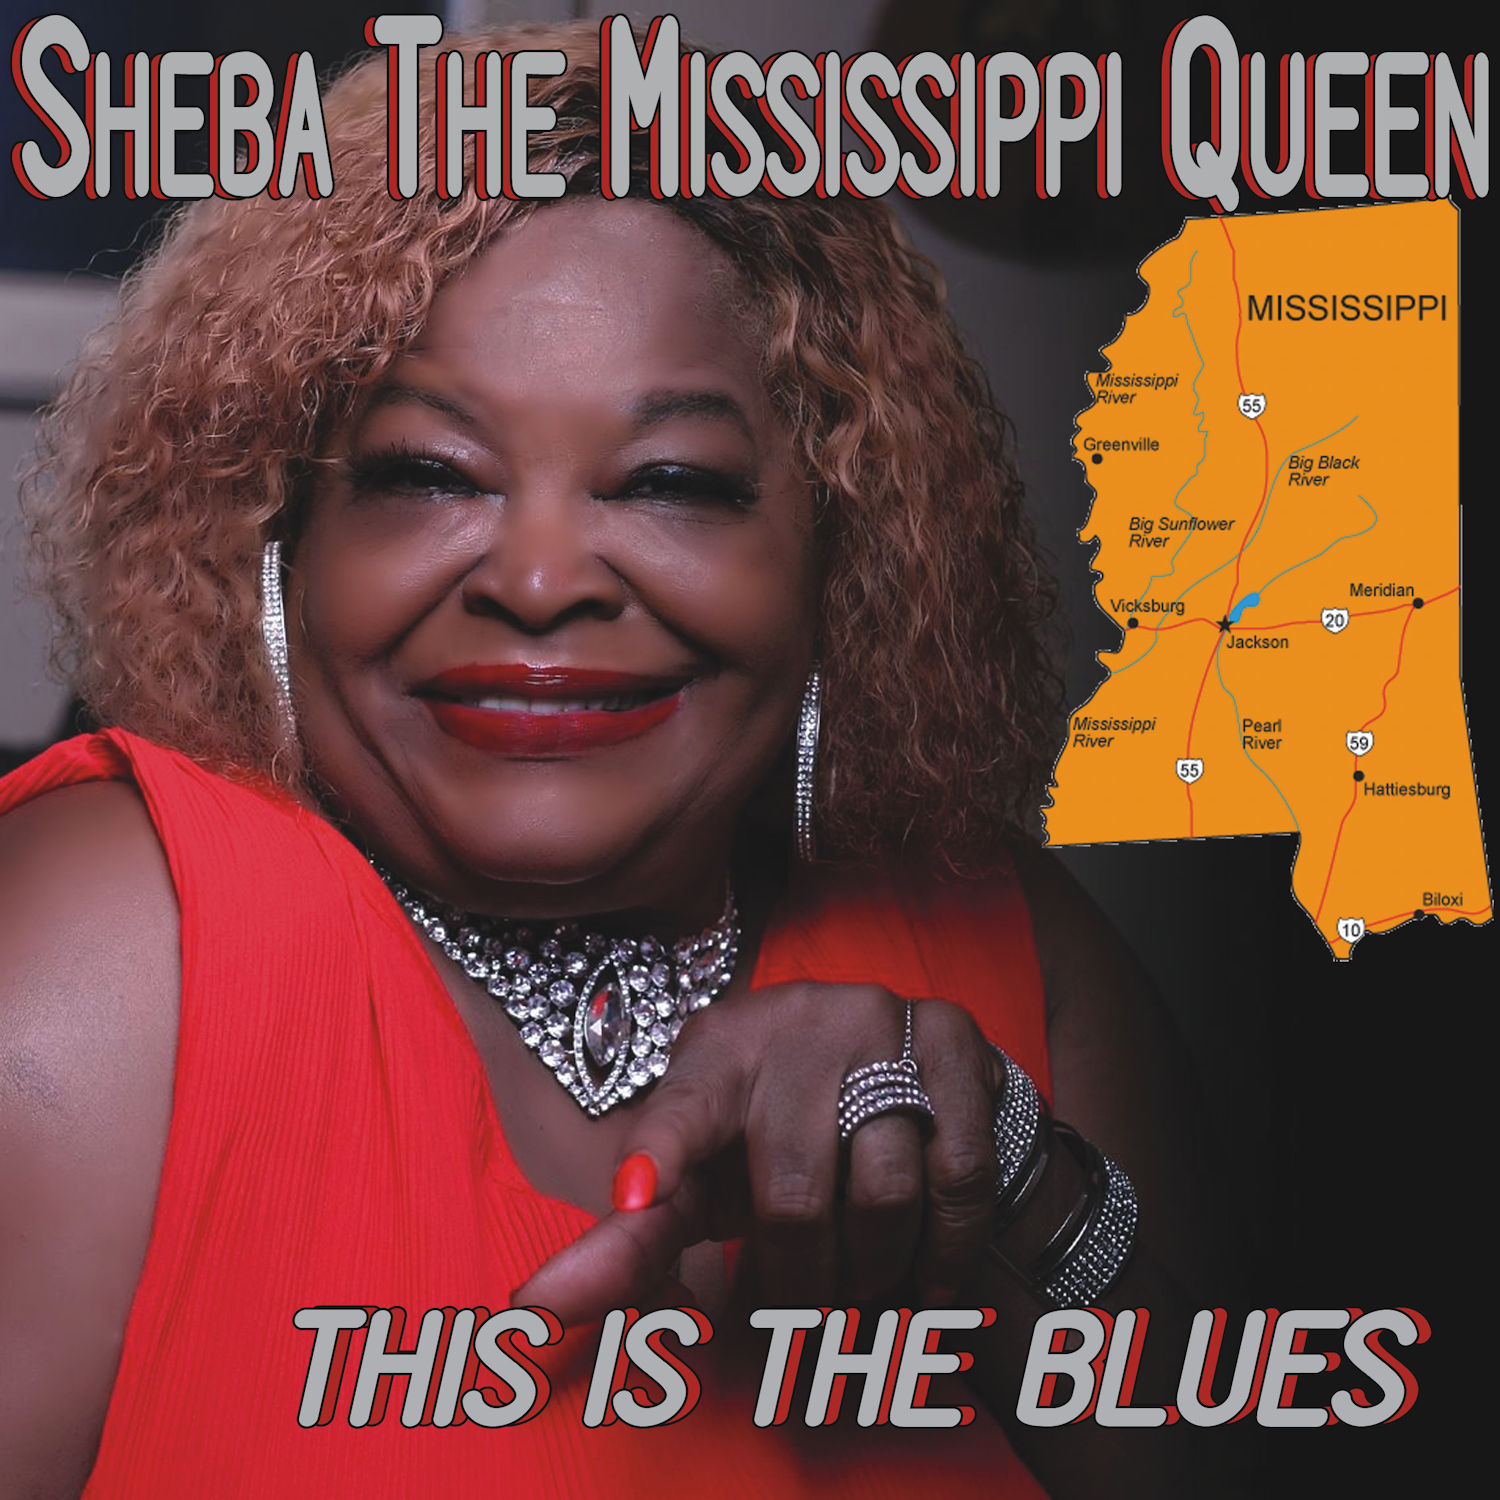 https://bongoboyrecords.com/wp-content/uploads/2022/03/1500-Sheba-Artwork-This-Is-The-Blues-with-map-Gray.jpg?quality=100.3020121812330